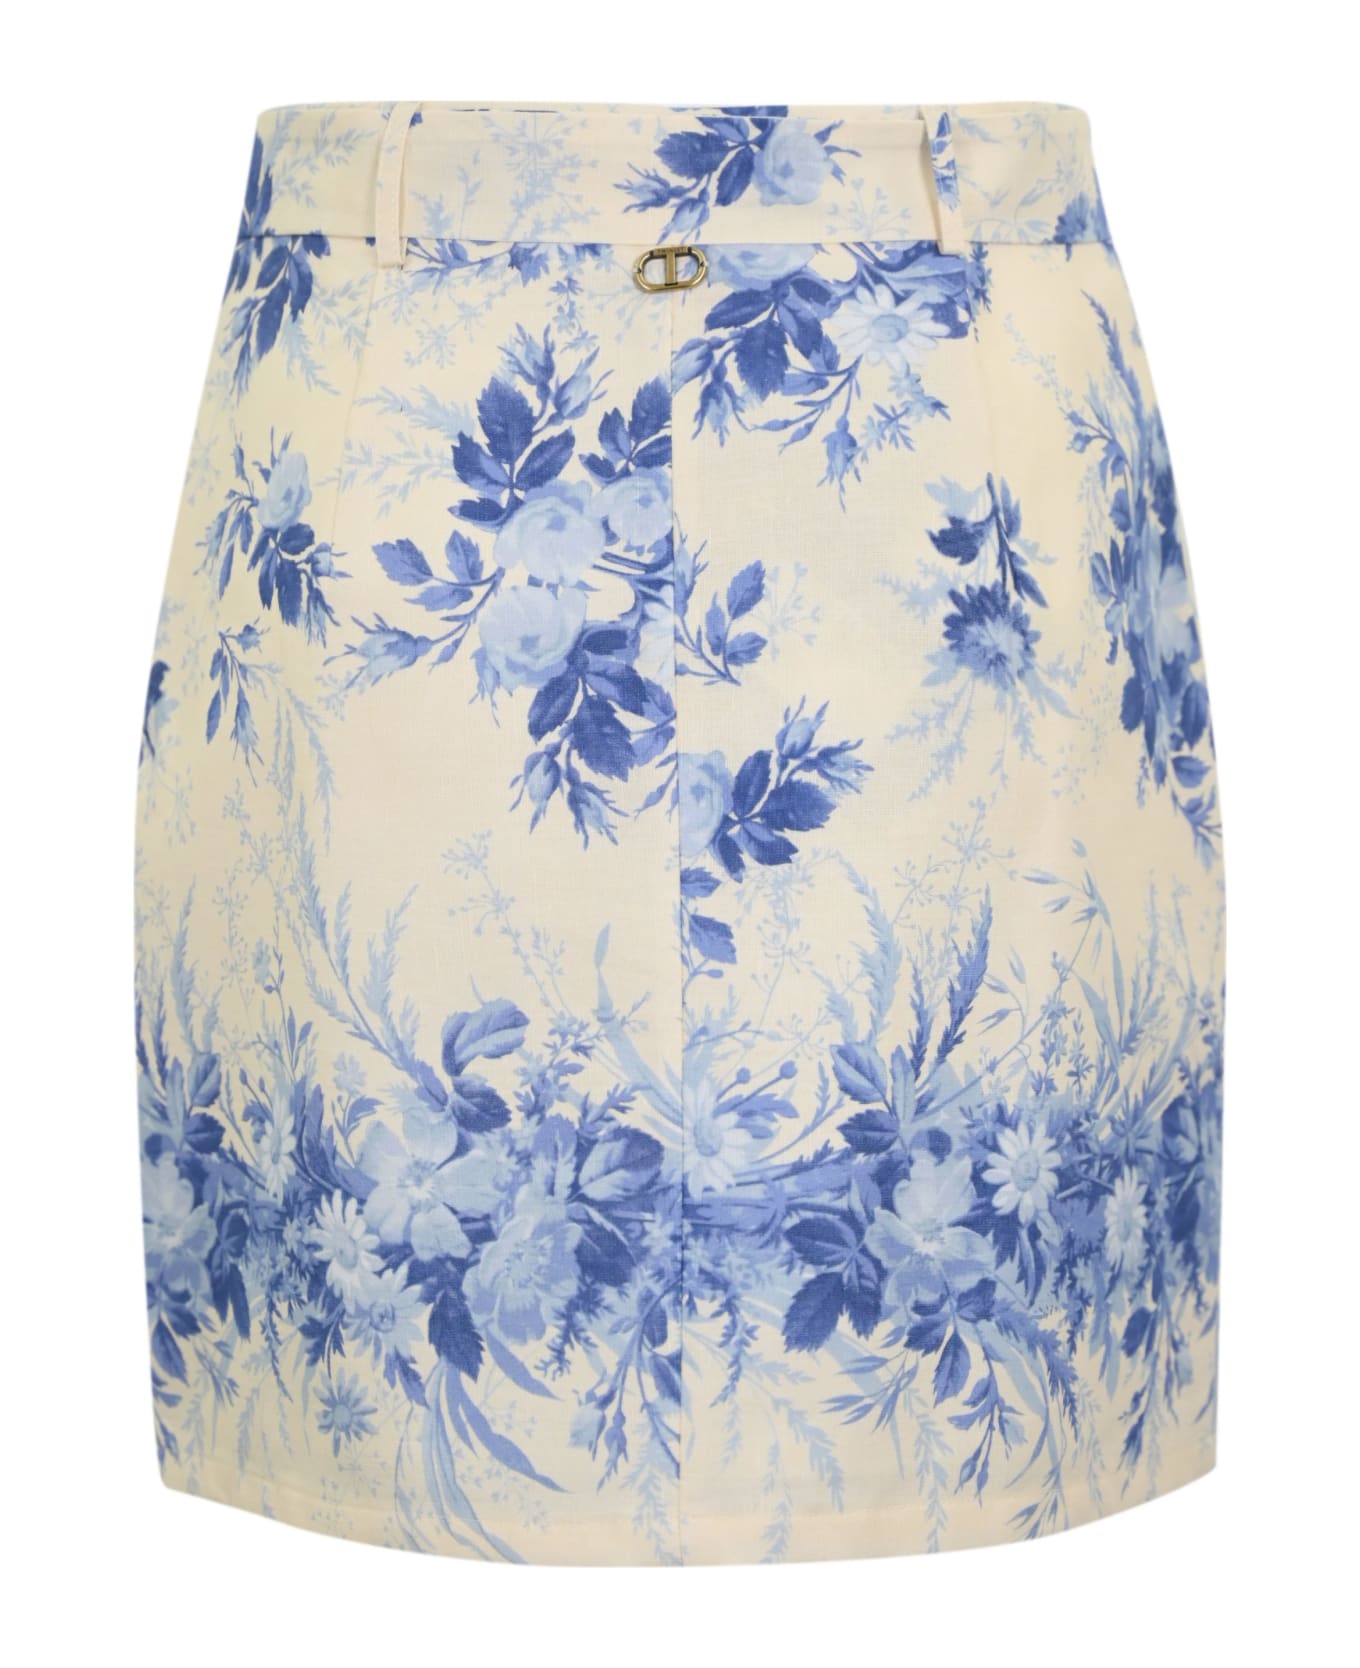 TwinSet Linen Skirt With Print - Avorio/blue